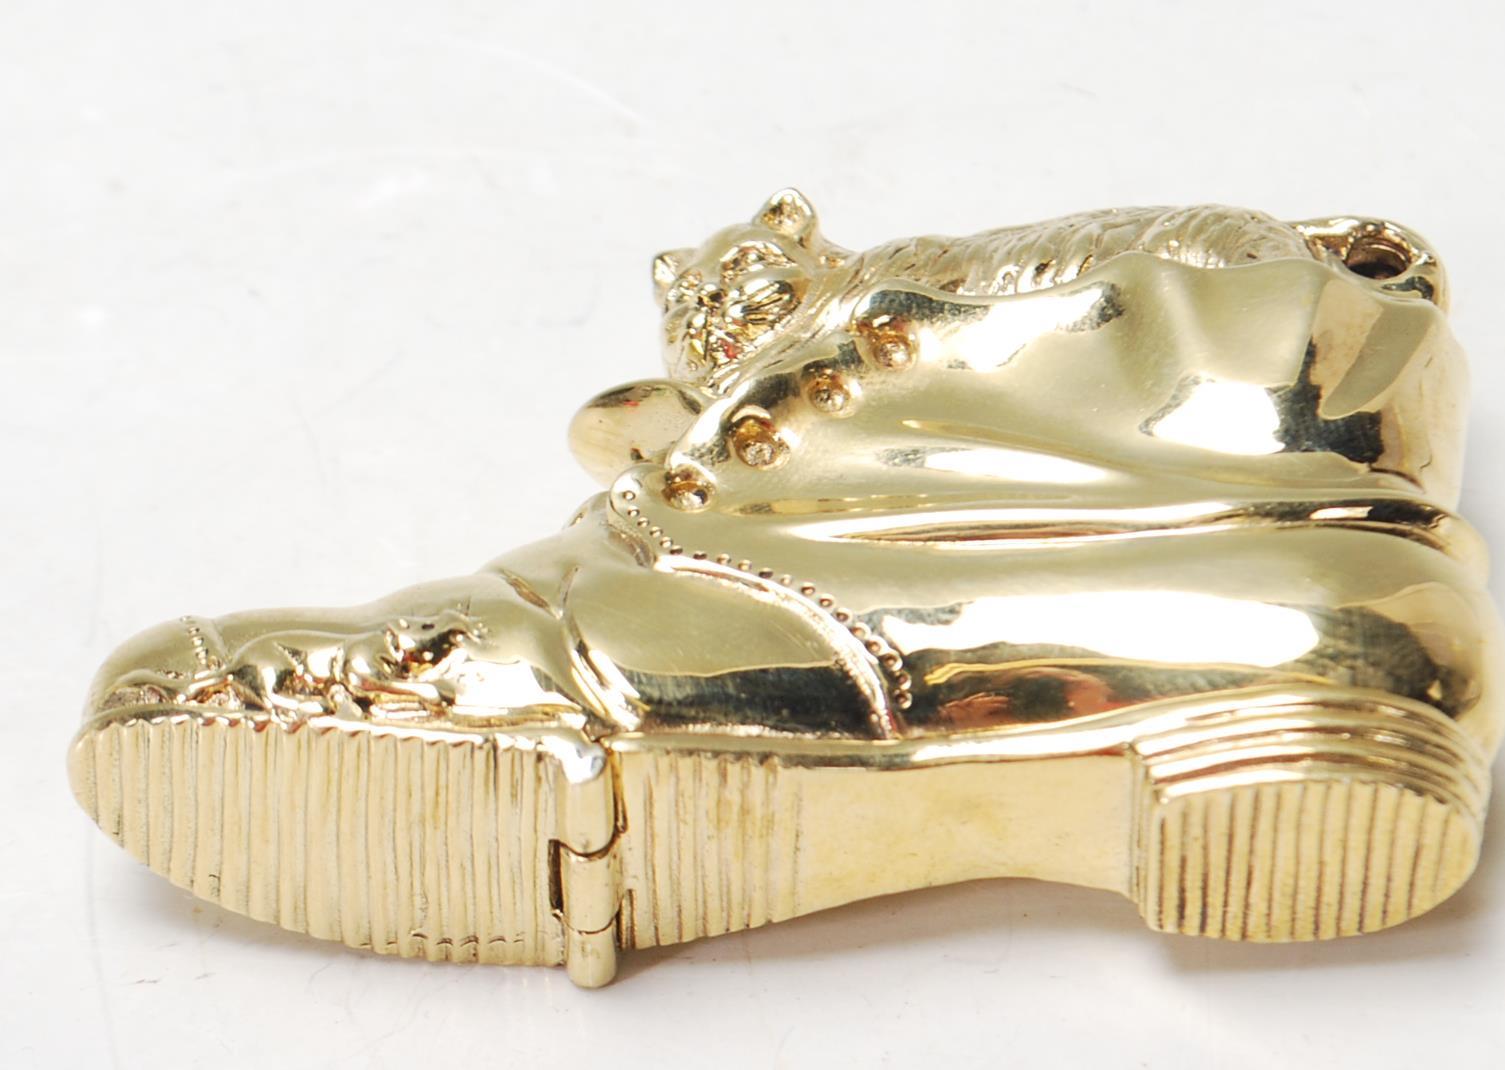 ANTIQUE STYLE 18CT GOLD PLATED SHOE & CAT VESTA - Image 5 of 7